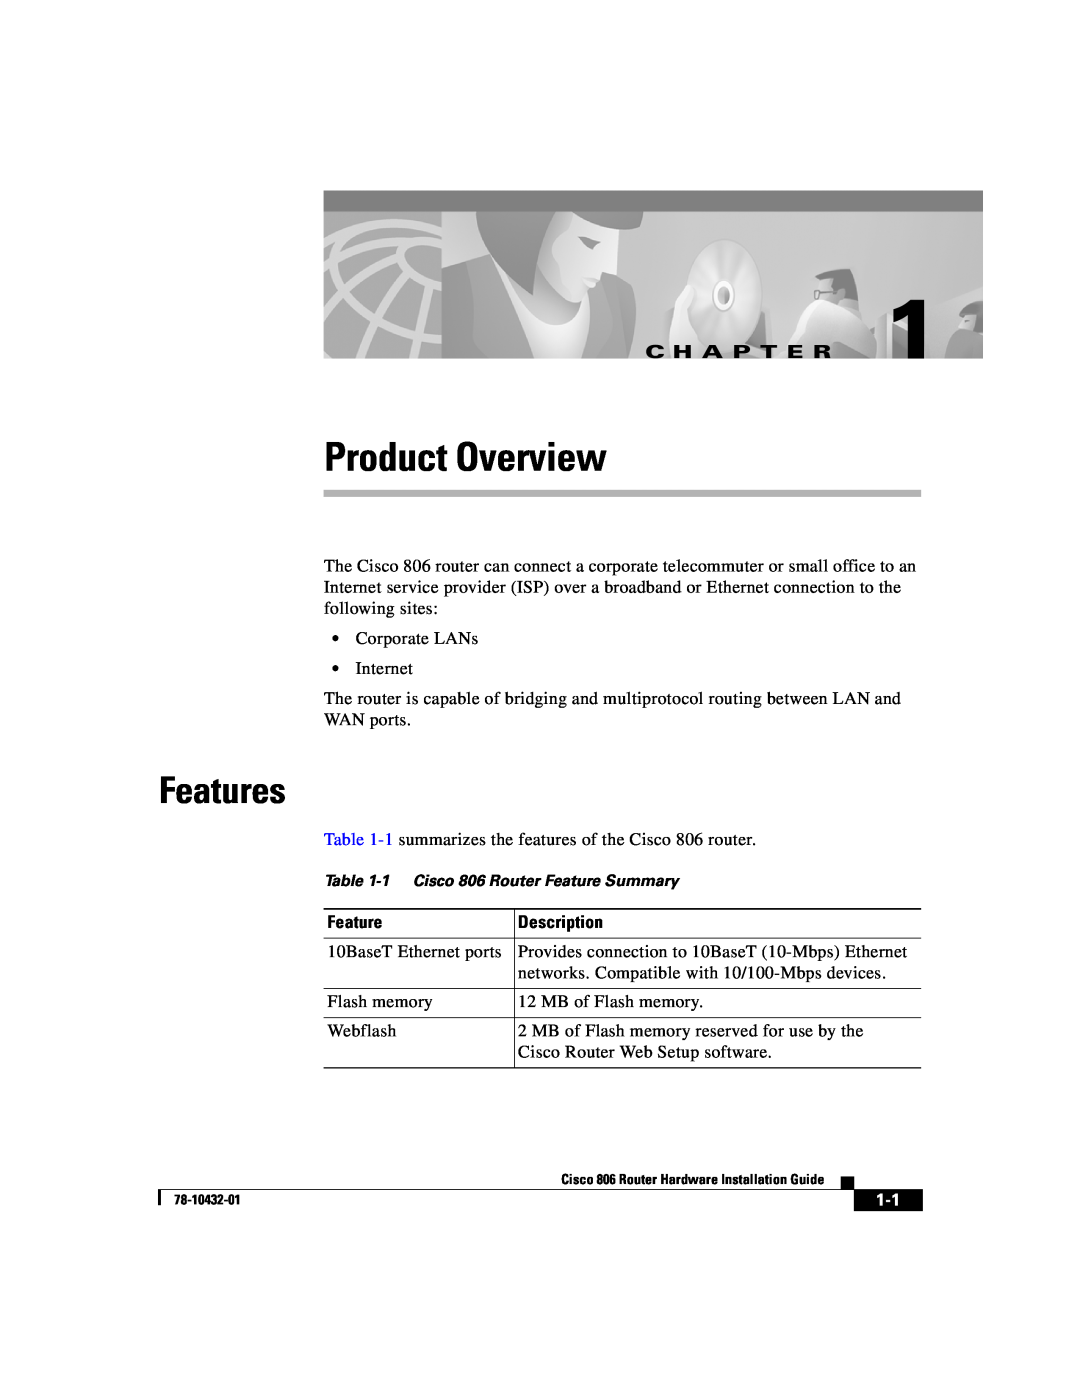 Cisco Systems 806 manual Product Overview, Features, C H A P T E R 